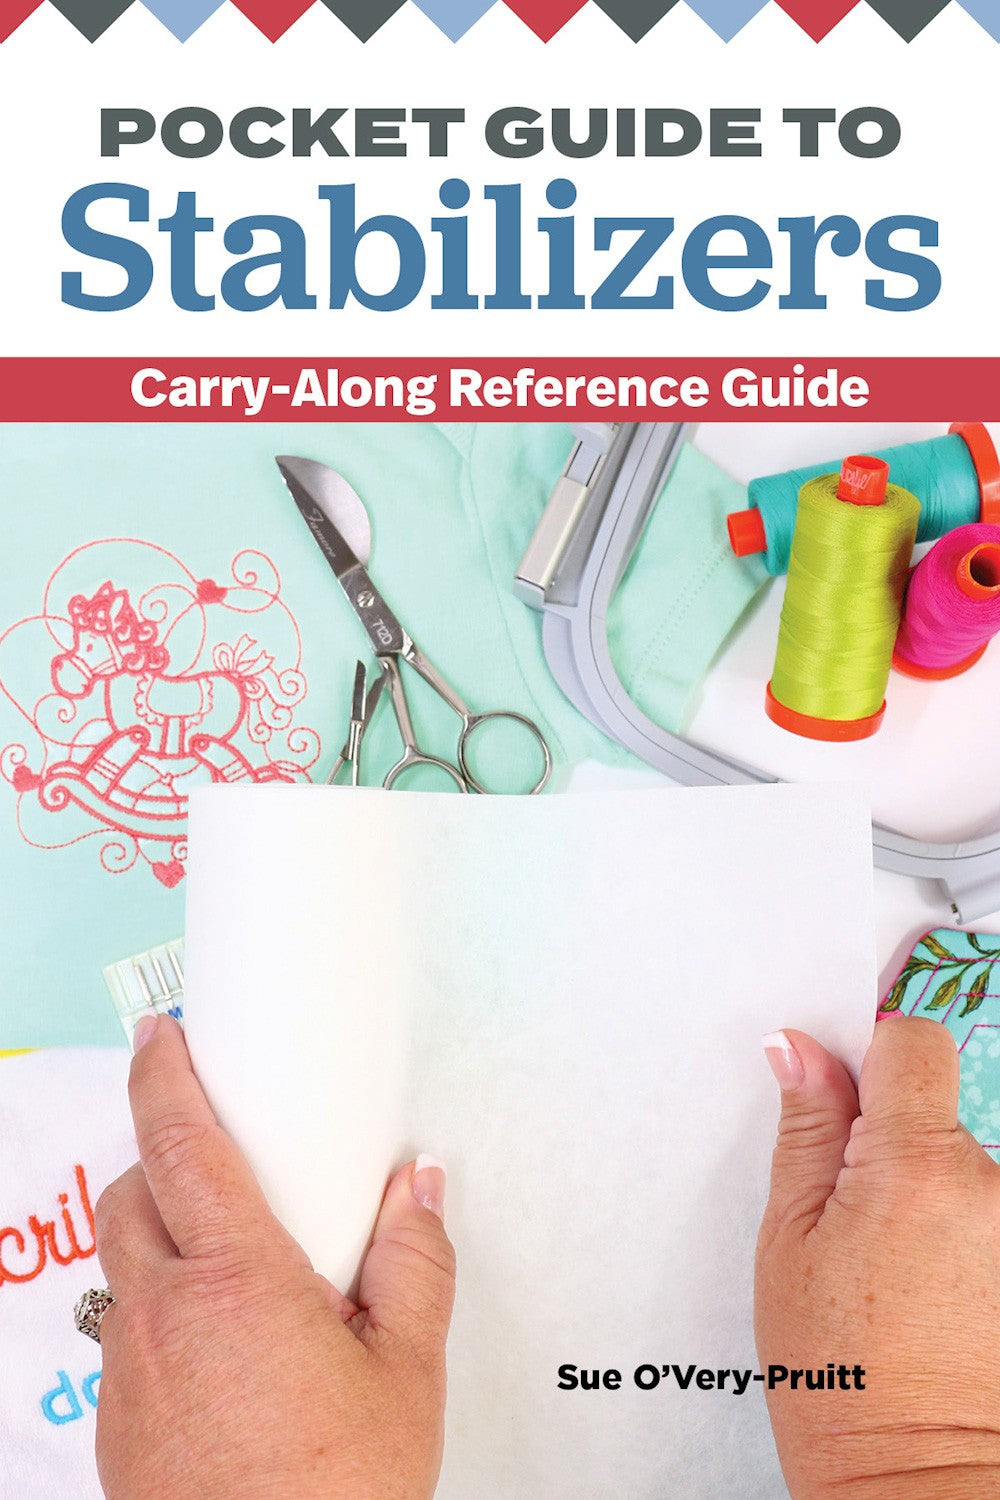 Pocket Guide to Stabilizers